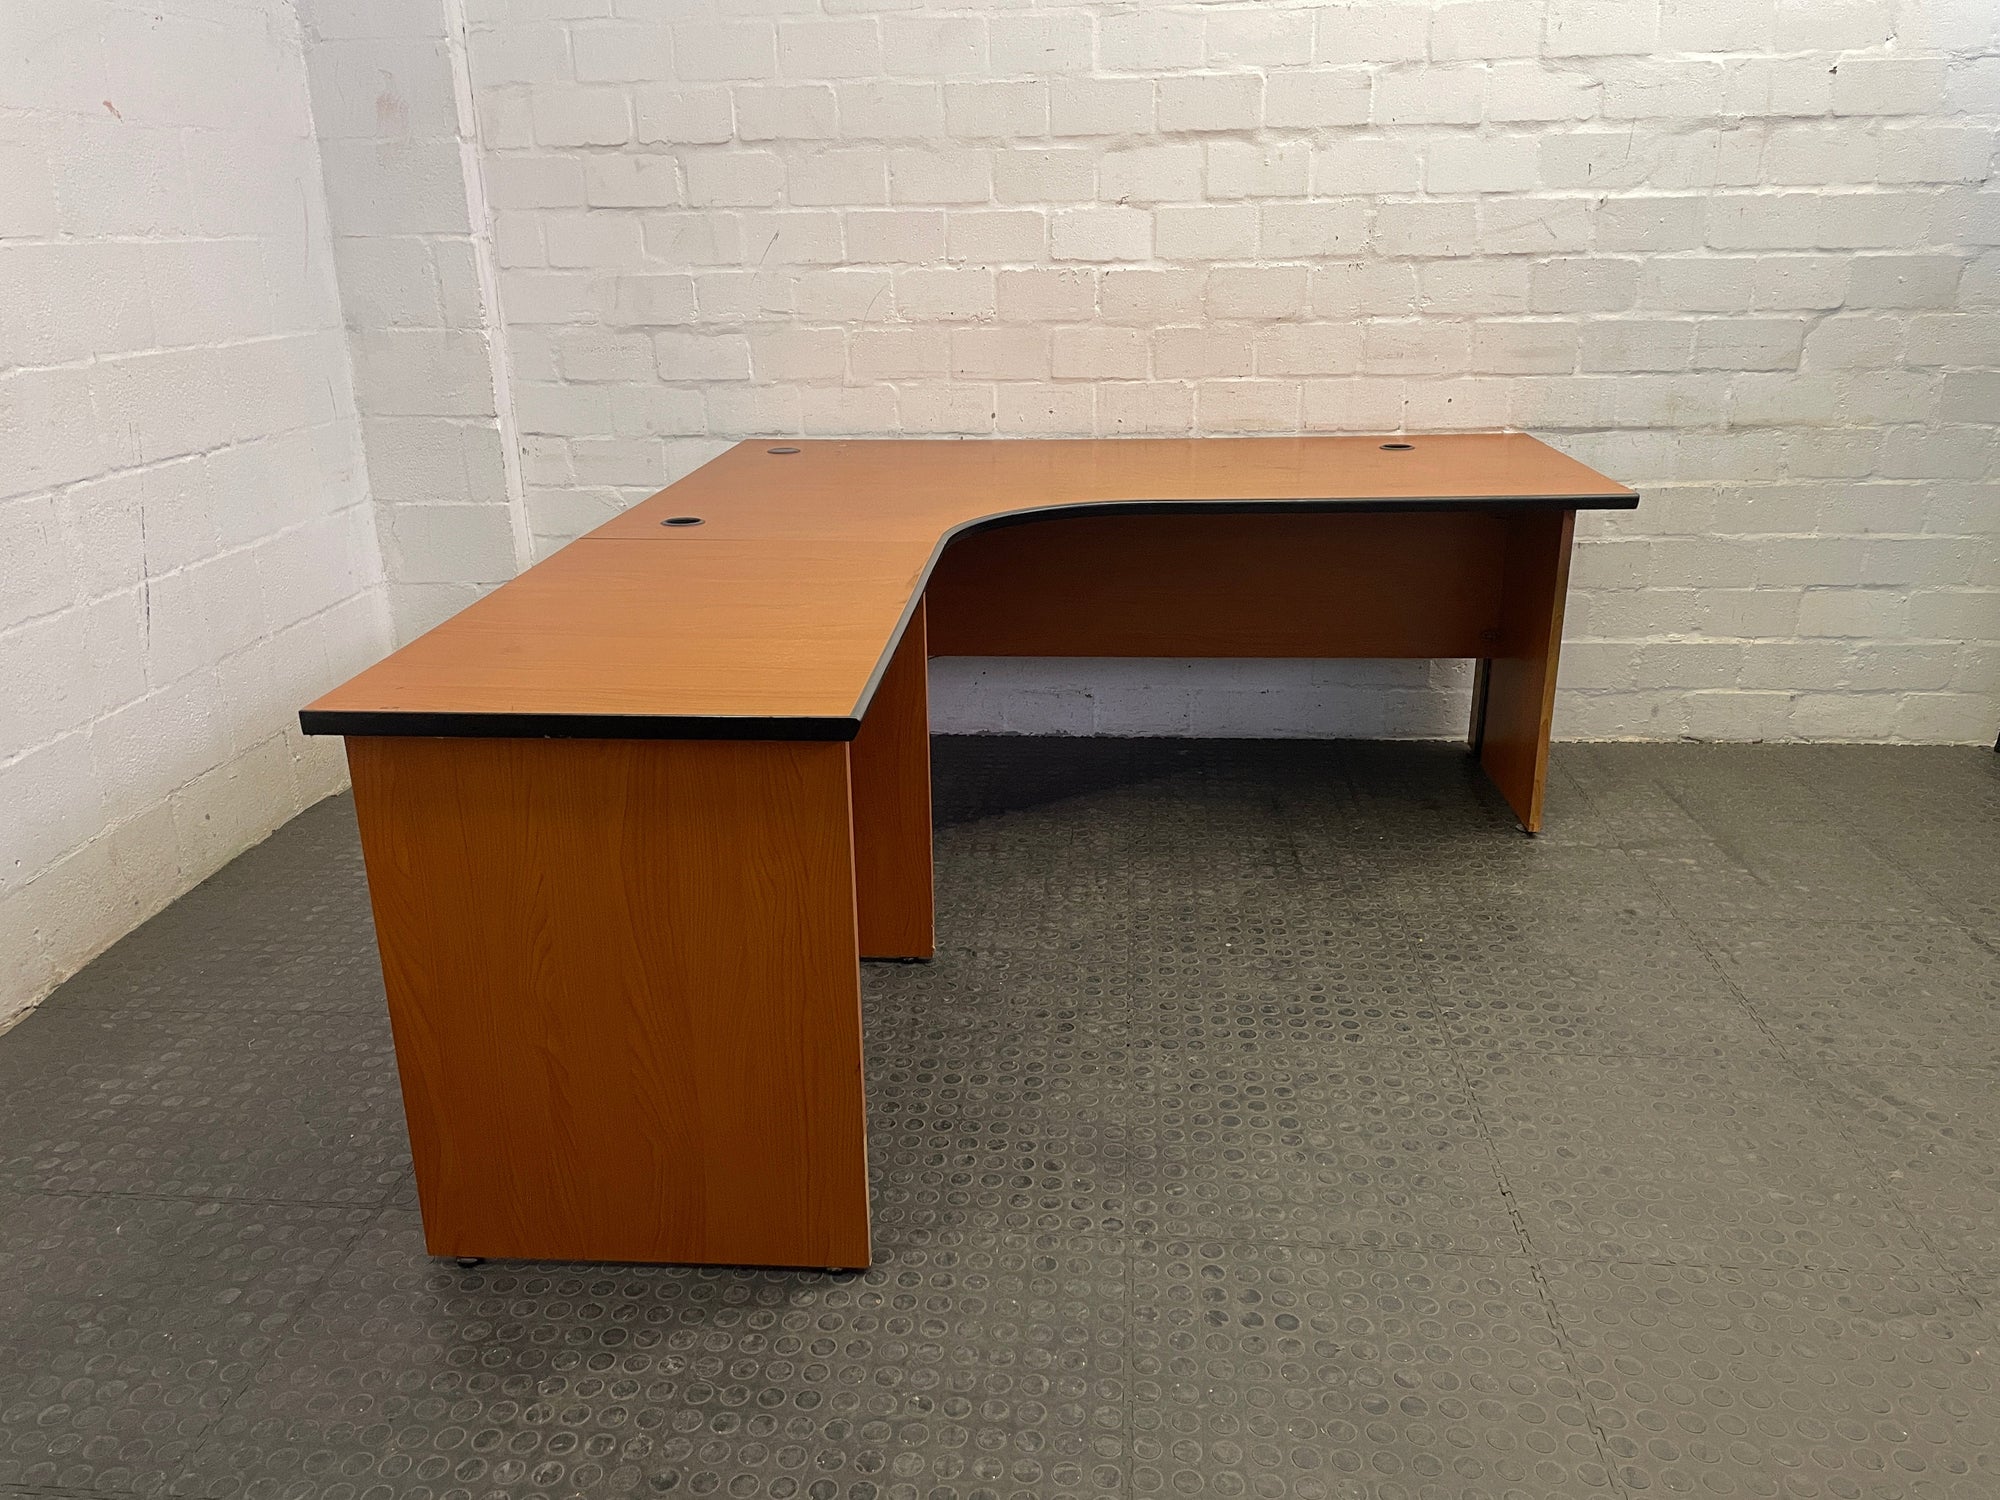 Two Seater L-Shaped Cluster Desk